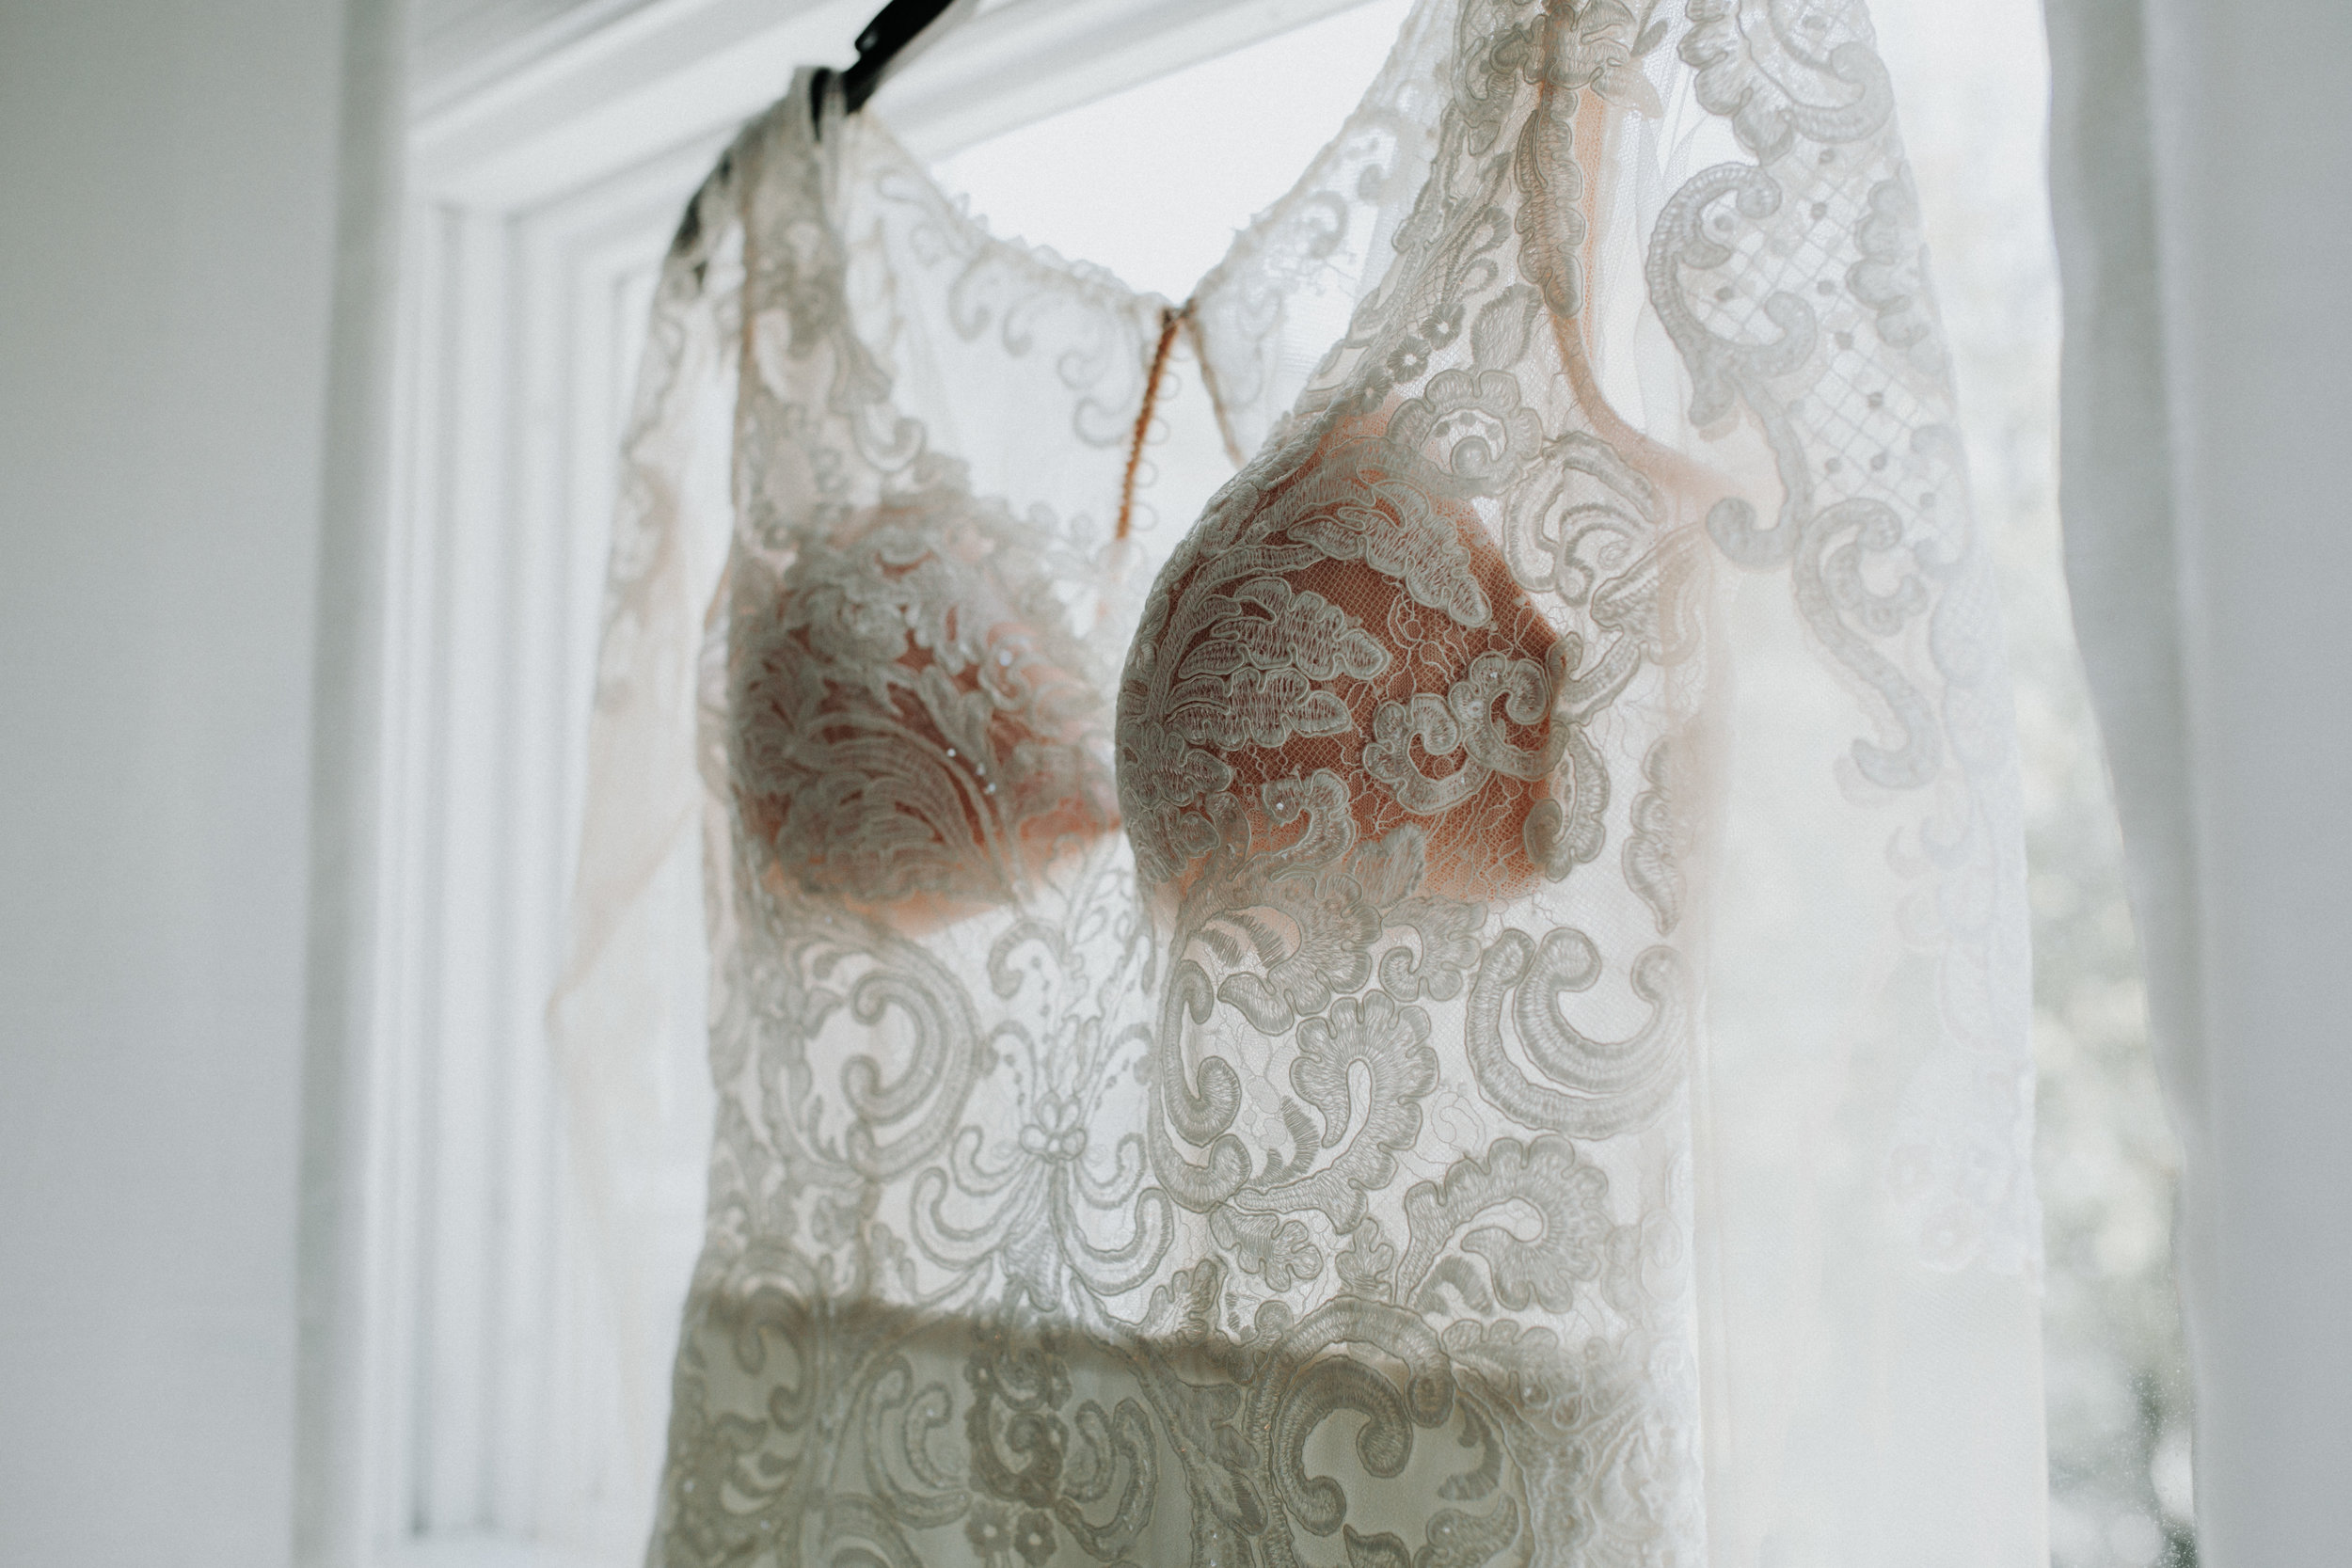 Gorgeous Lace Wedding Dress - Dara’s Garden Knoxville East Tennessee Wedding — The Overwhelmed Bride Wedding Blog